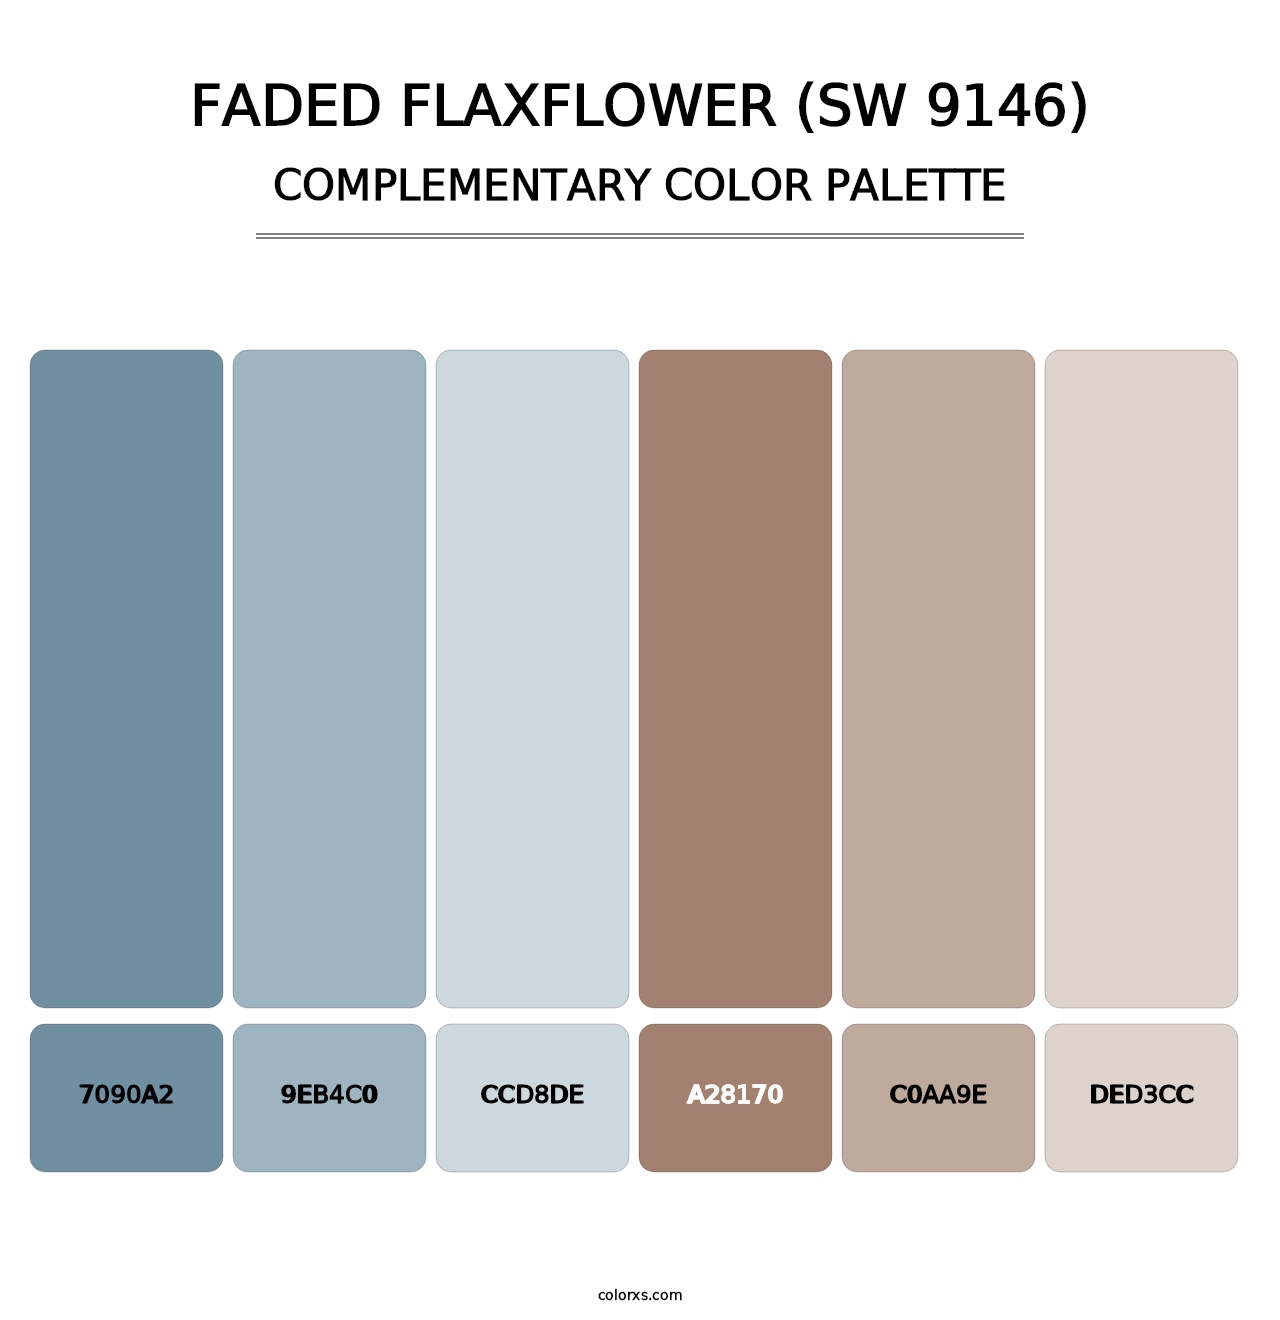 Faded Flaxflower (SW 9146) - Complementary Color Palette